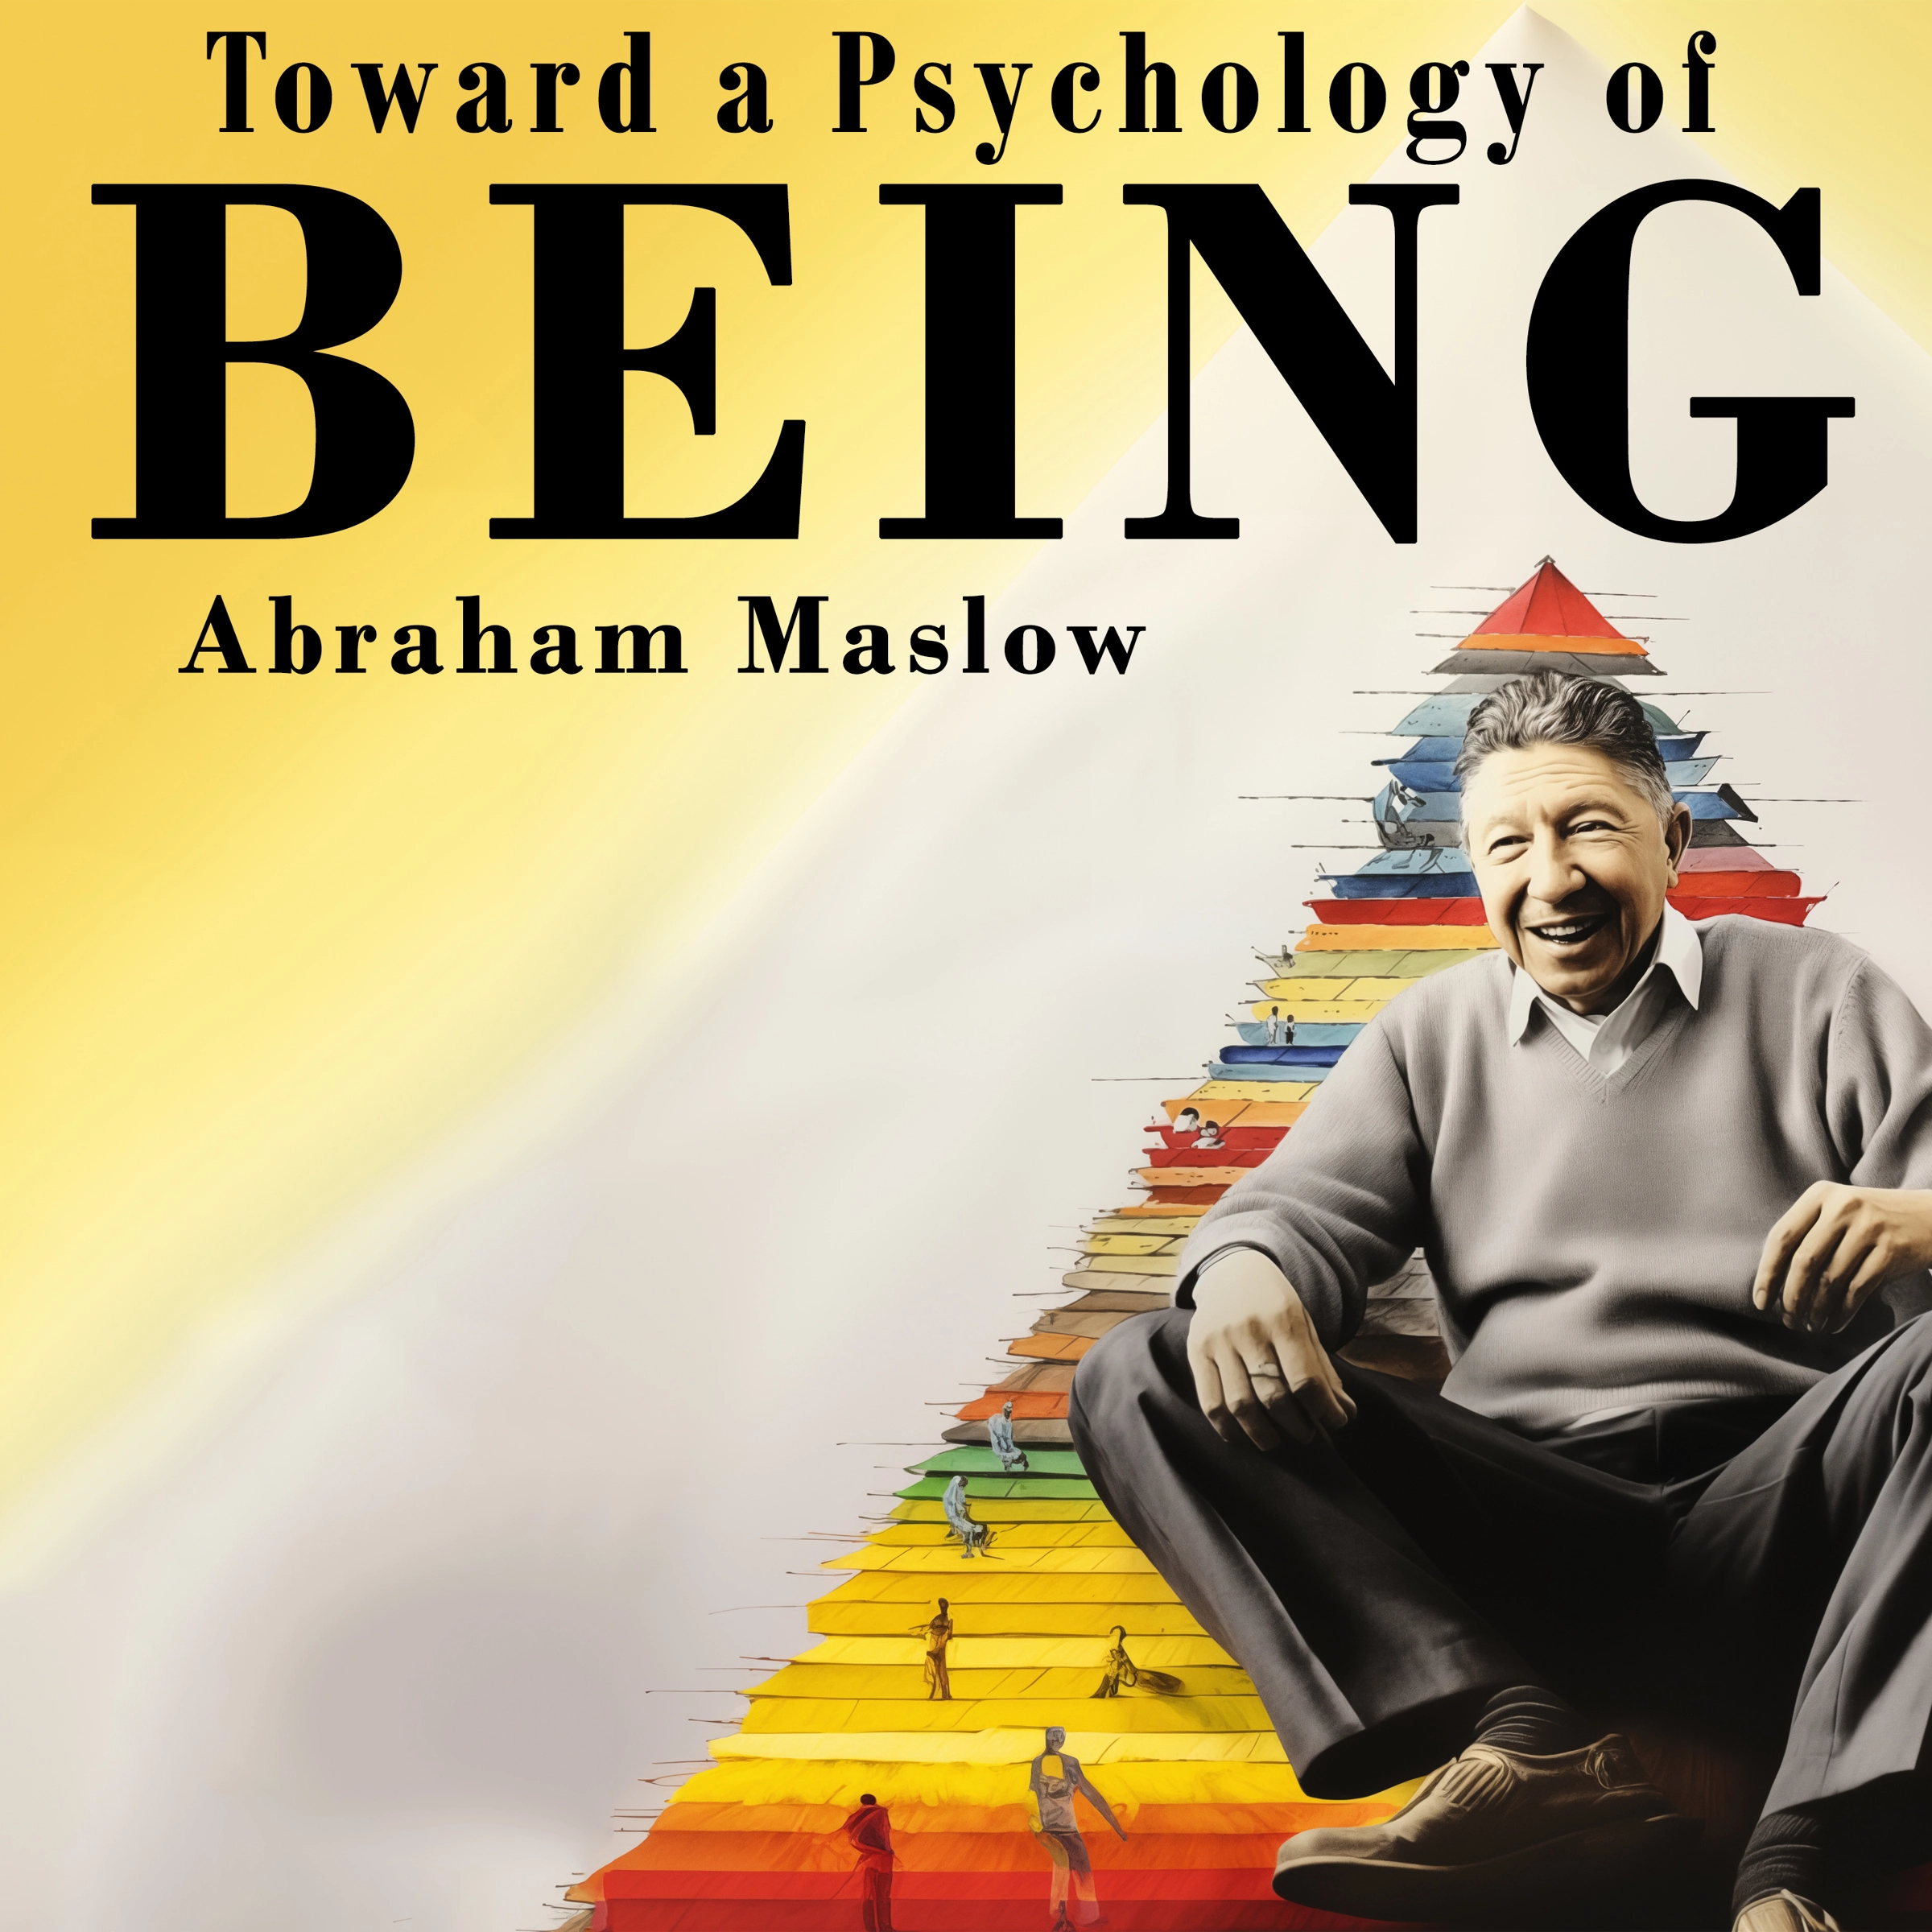 Toward a Psychology of Being by Abraham Maslow Audiobook